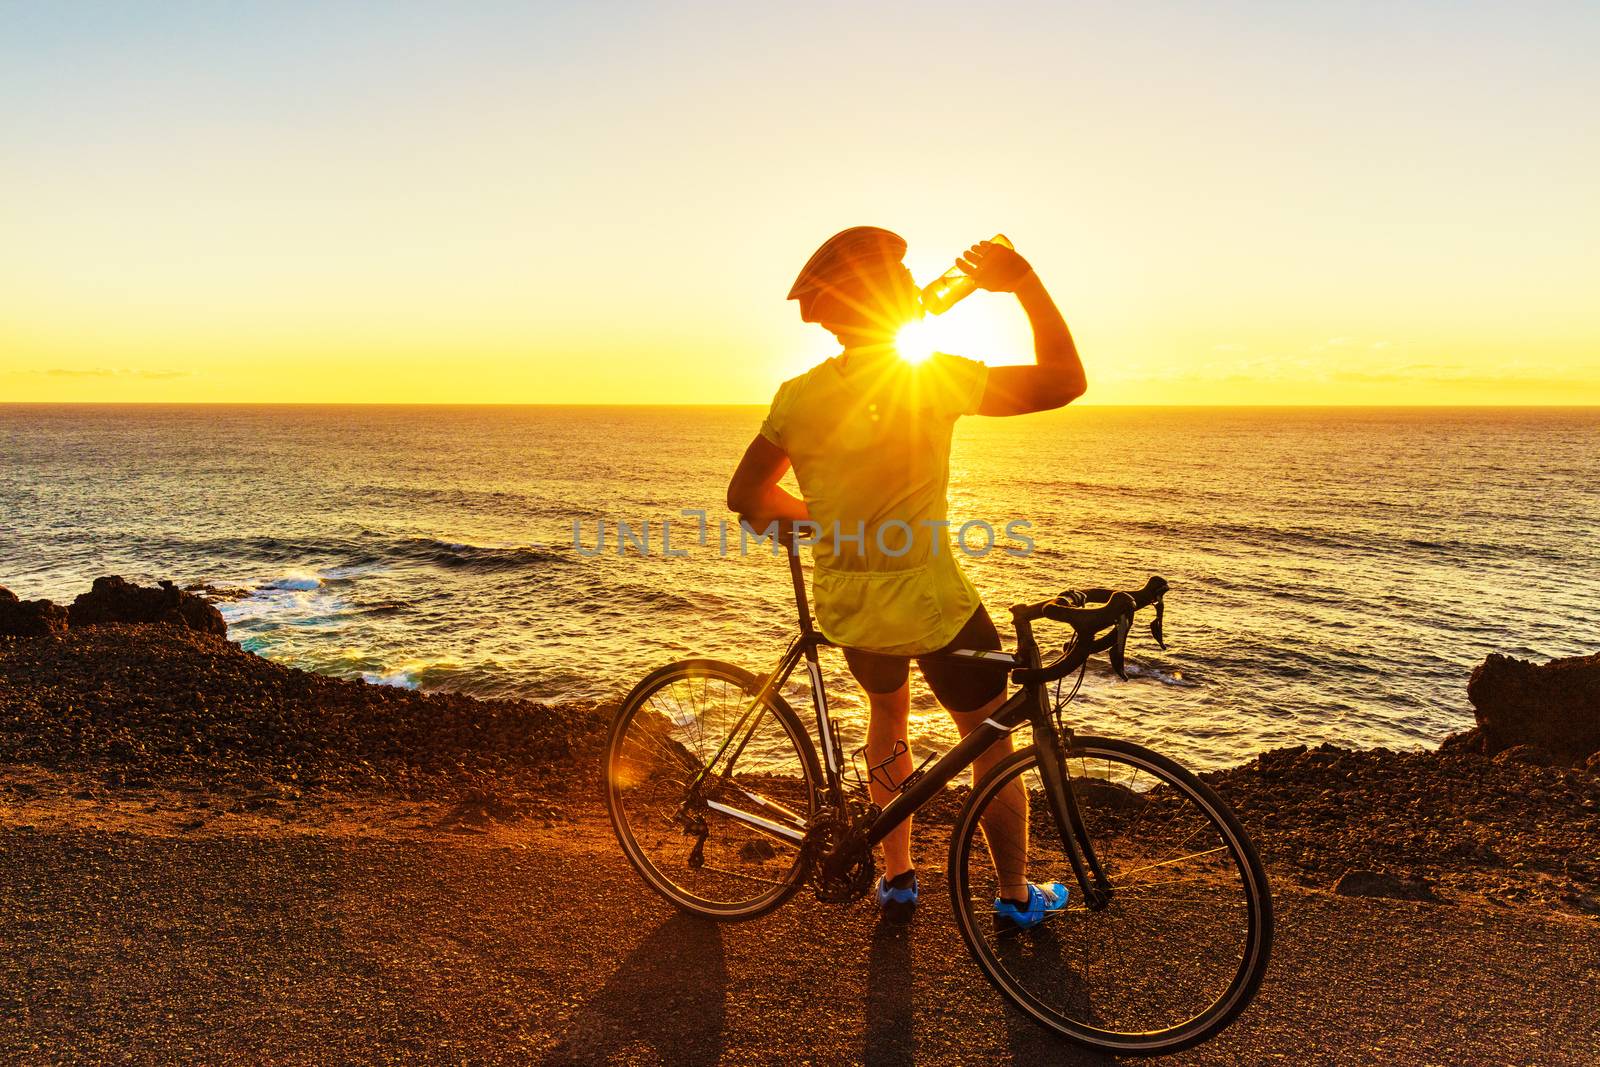 Athlete cyclist man drinking water after intensive biking training, enjoying sunset and ocean. Healthy active lifestyle sports fitness man resting on bike with sun flare.